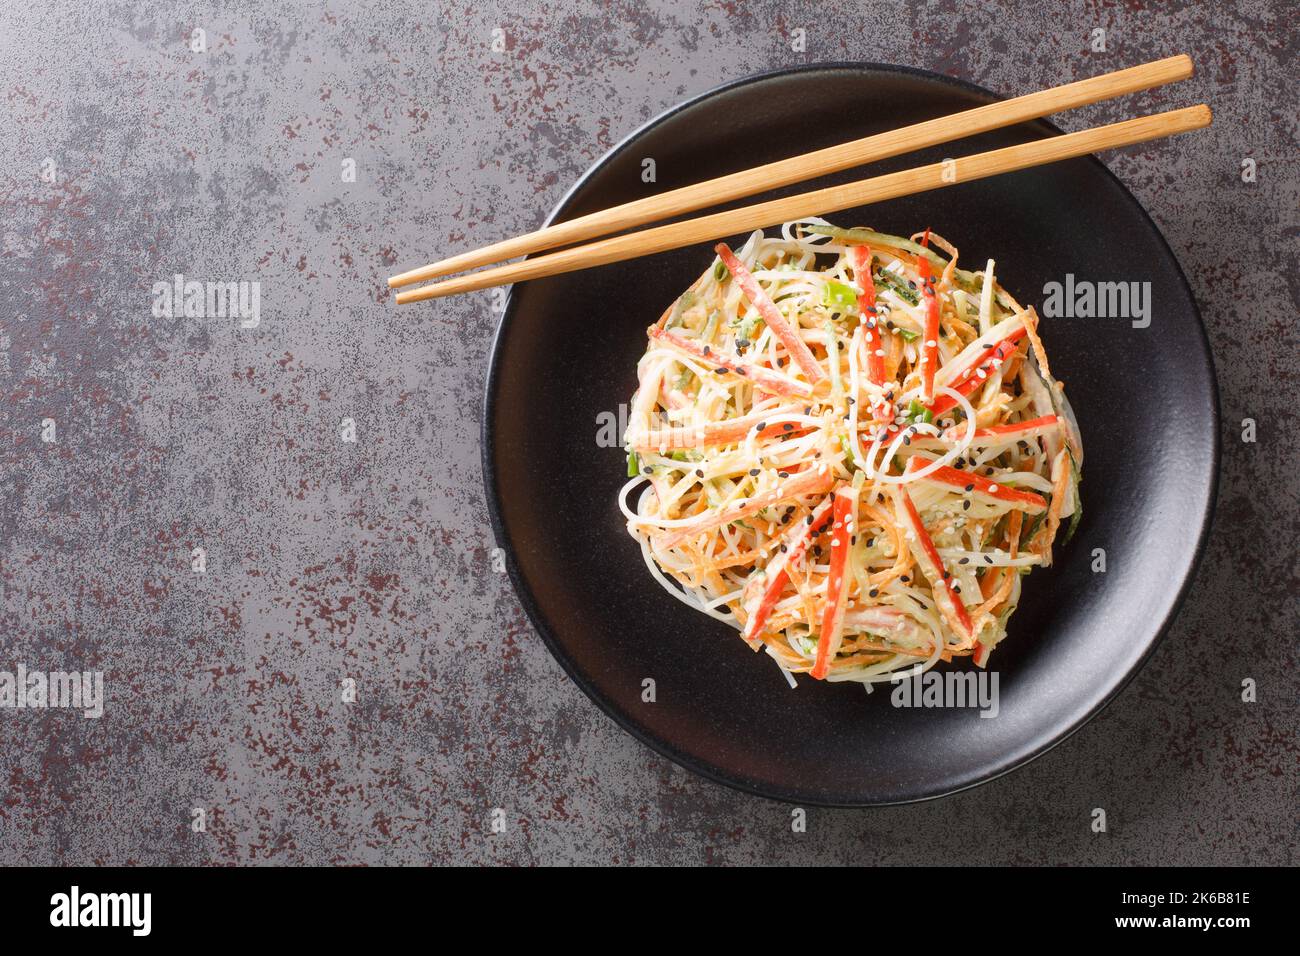 Kani or kanikama salad is a Japanese crab salad that is a delicious mix of crab meat crunchy cucumber and carrots and spicy mayonnaise dressing closeu Stock Photo